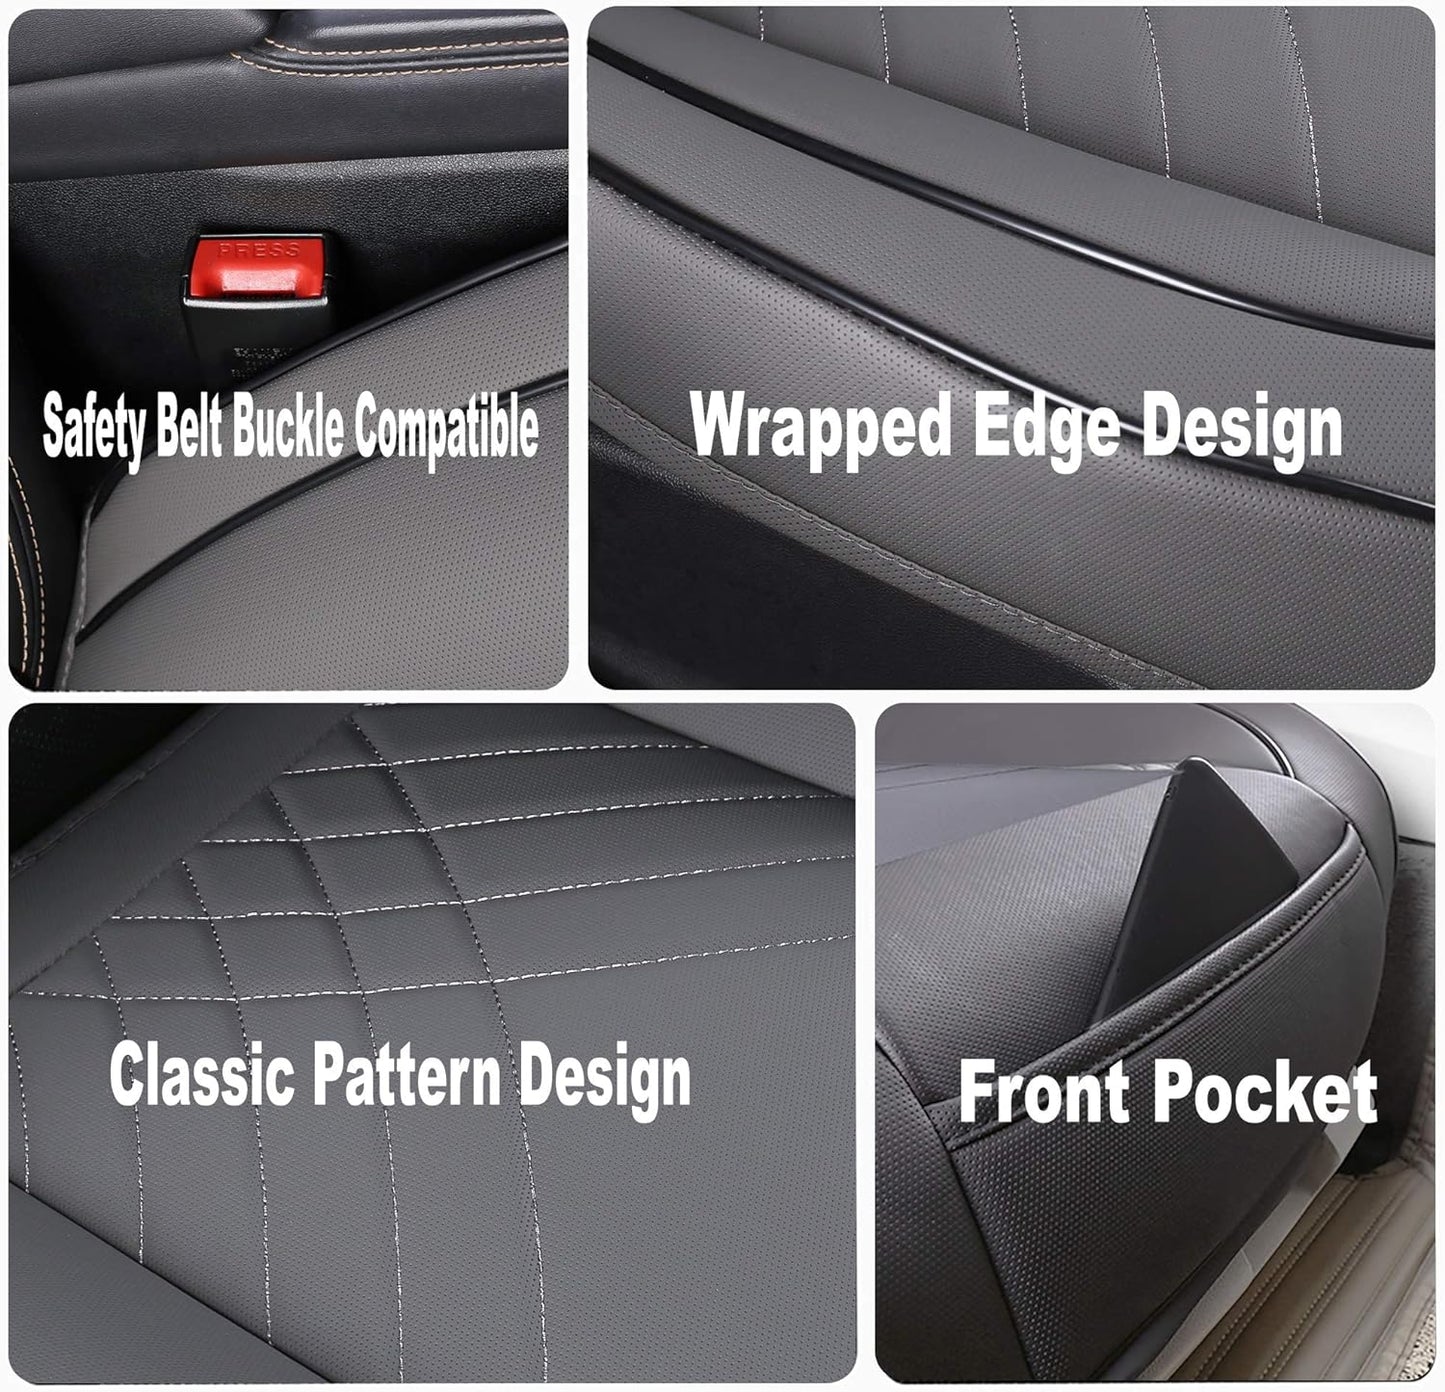 Premium PU Car Seat Cover - Front Seat Protector Works with 95% of Vehicles - Padded, Anti-Slip, Full Wrapping Edge - (Dimensions: 21'' X 20.5'') - 1 Piece (Gray)